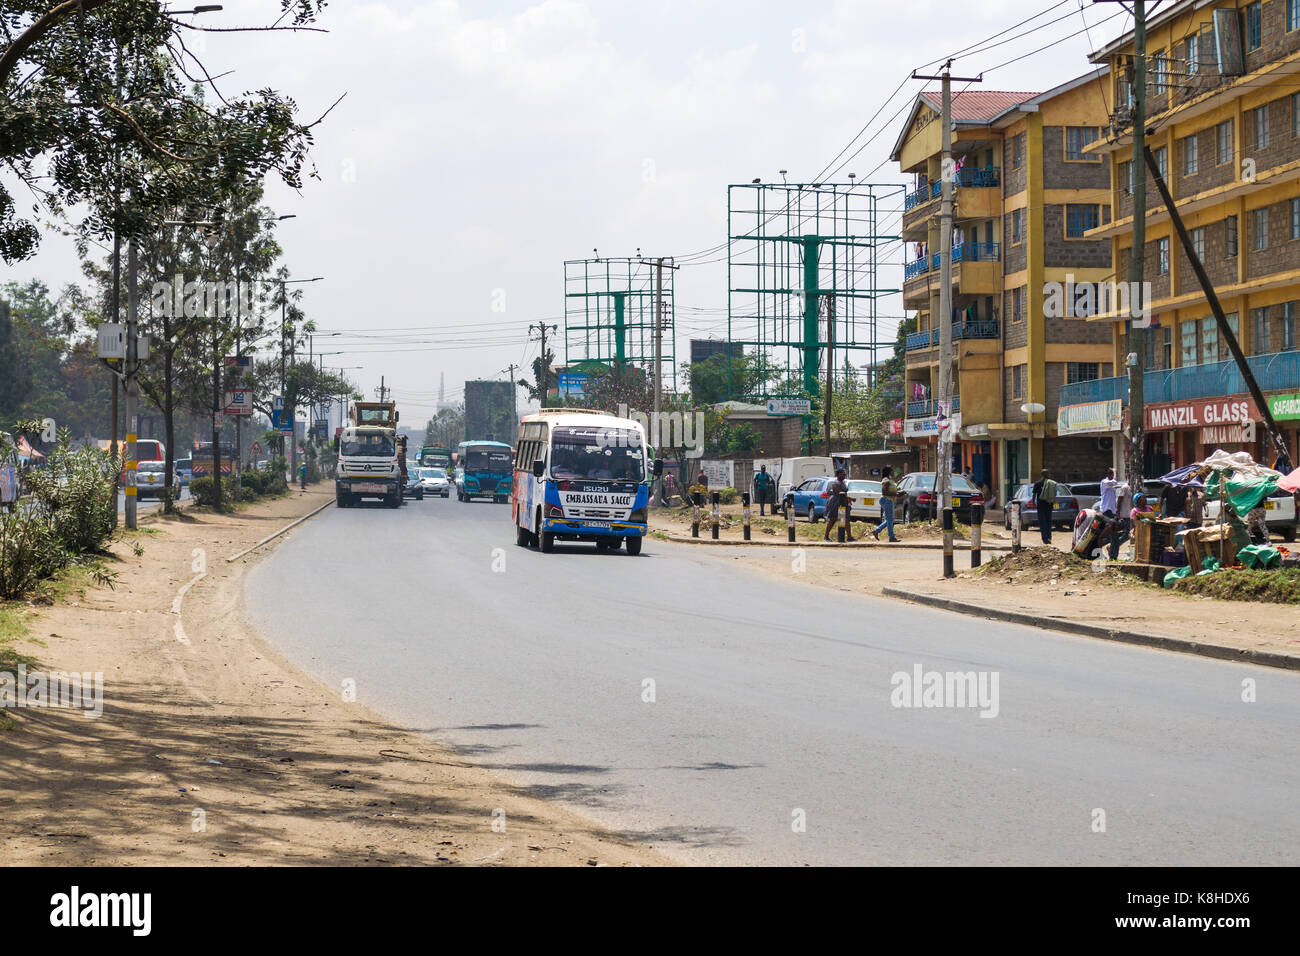 Vehicles drive down Jogoo road with people and buildings in background, Nairobi, Kenya Stock Photo